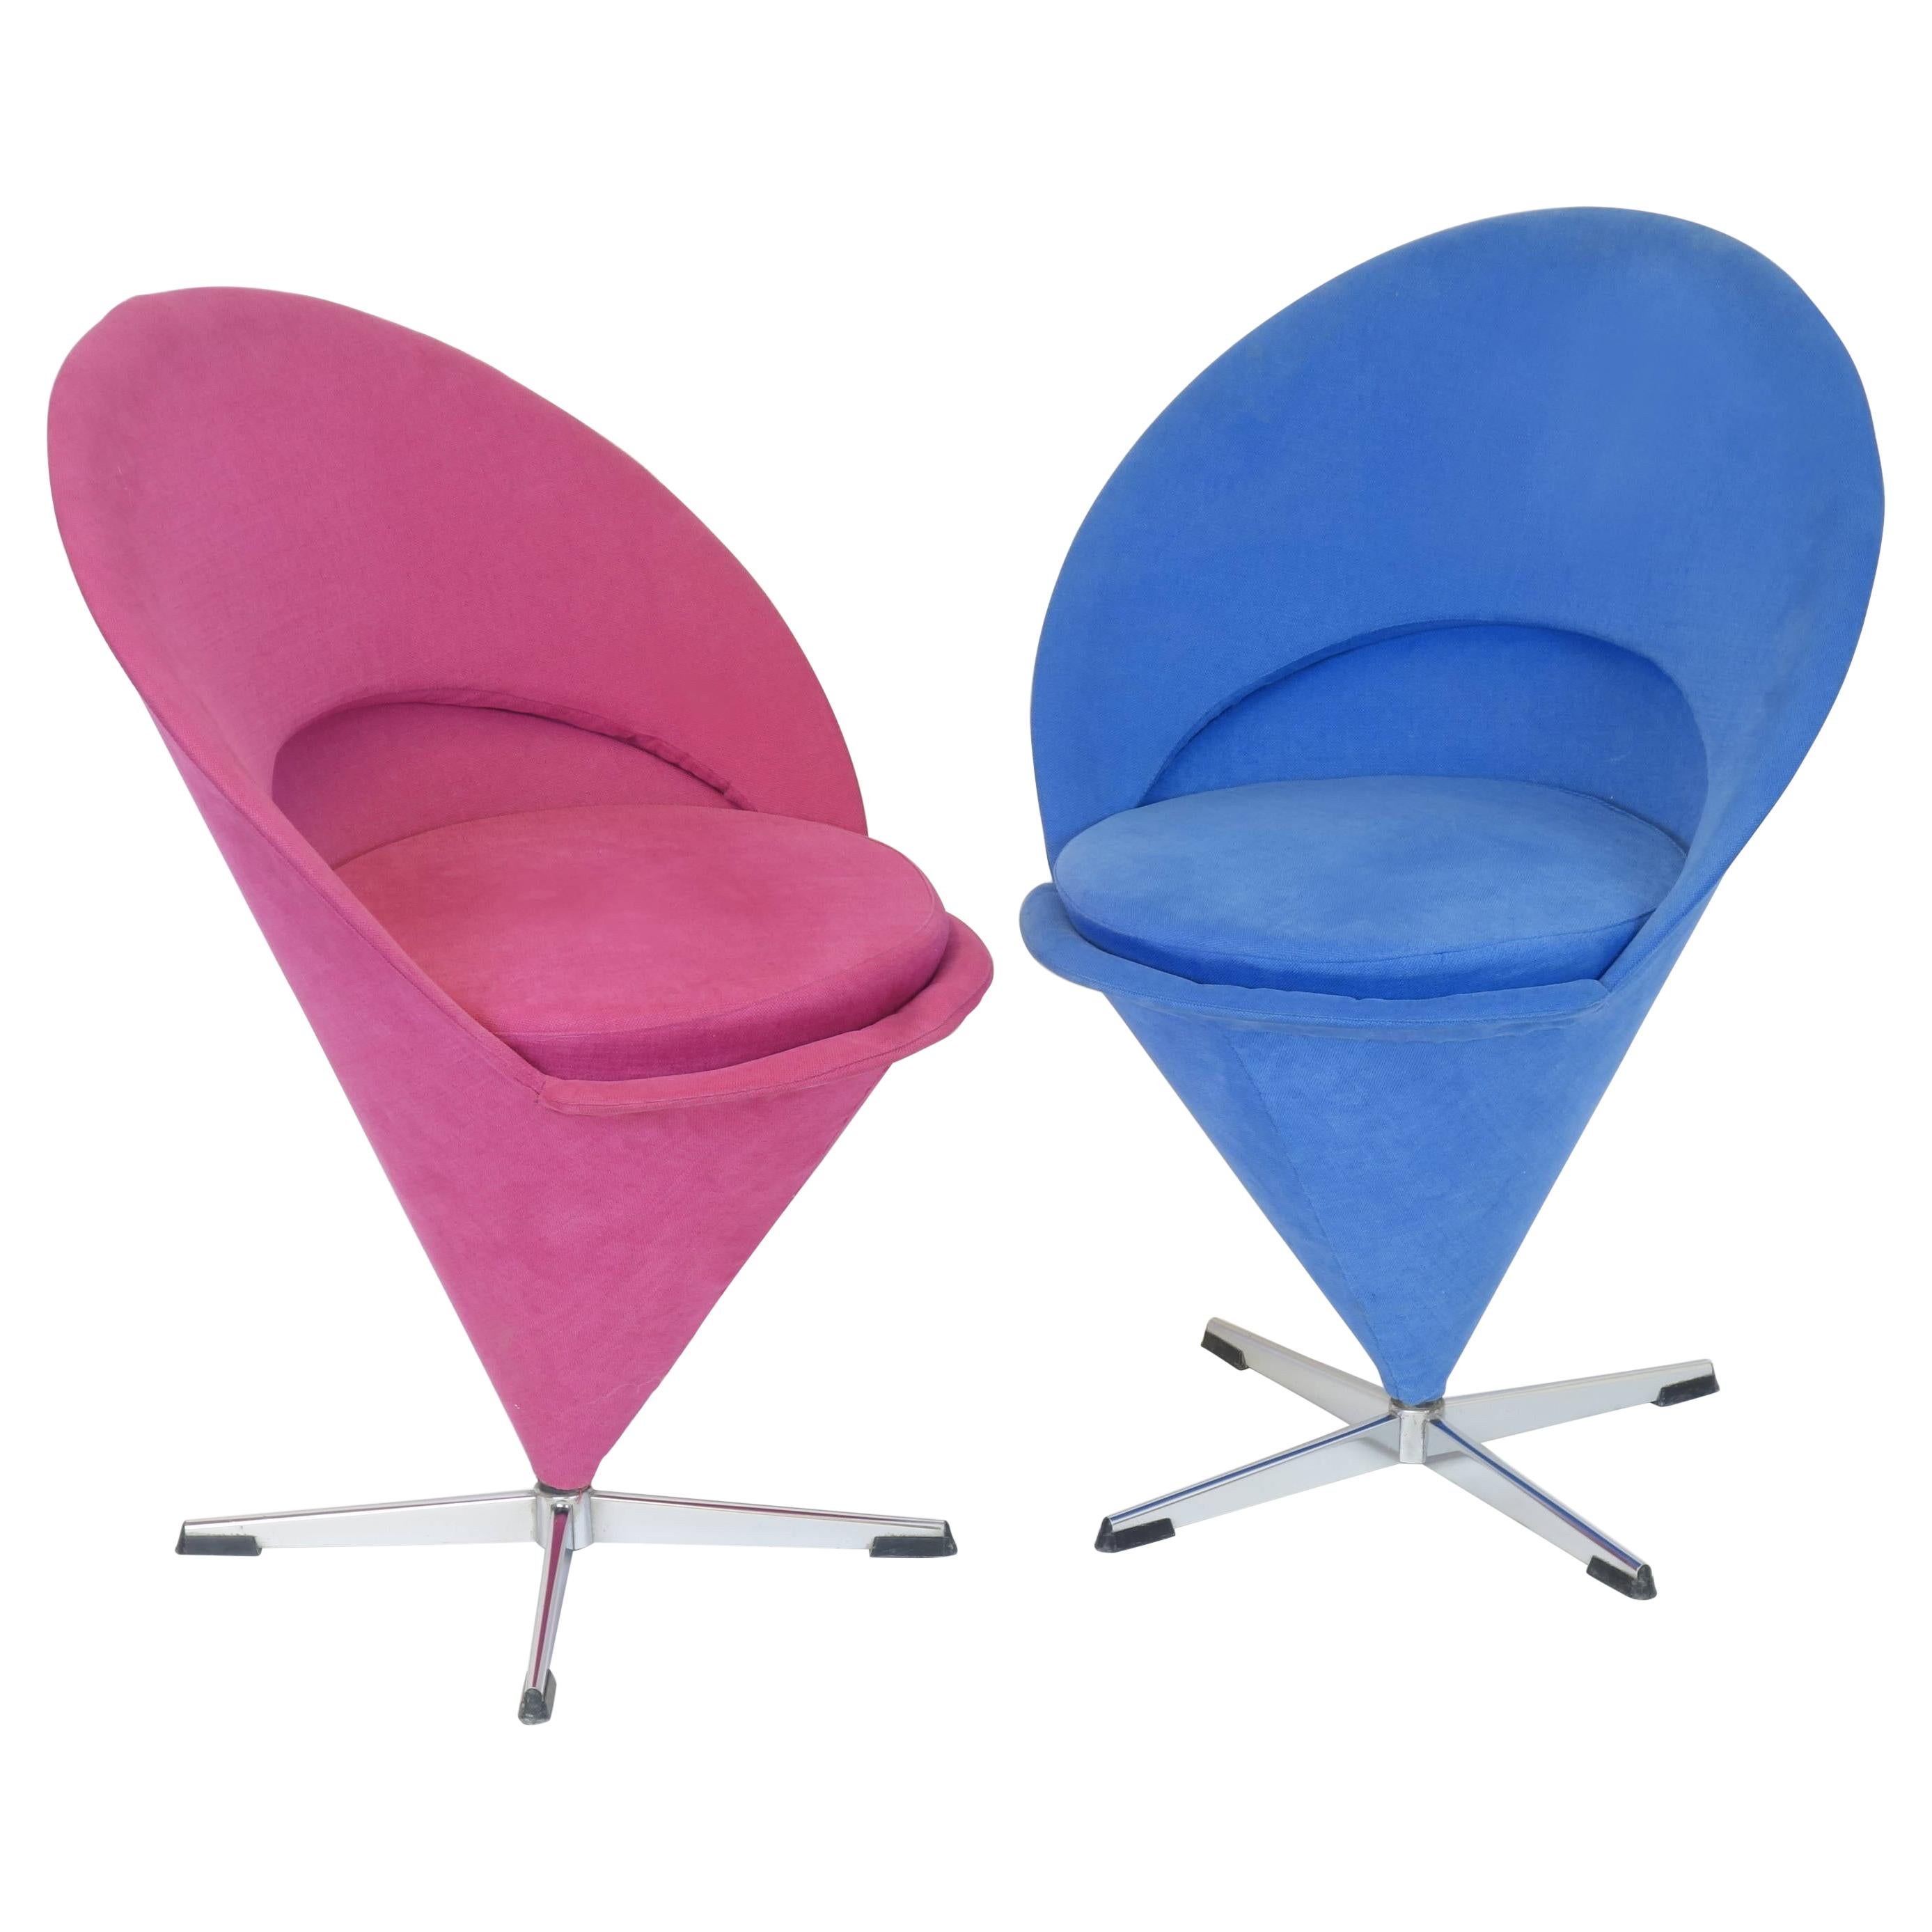 Original K1 Cone Chairs Design Blue Red by Verner Panton, Denmark, 1950s For Sale